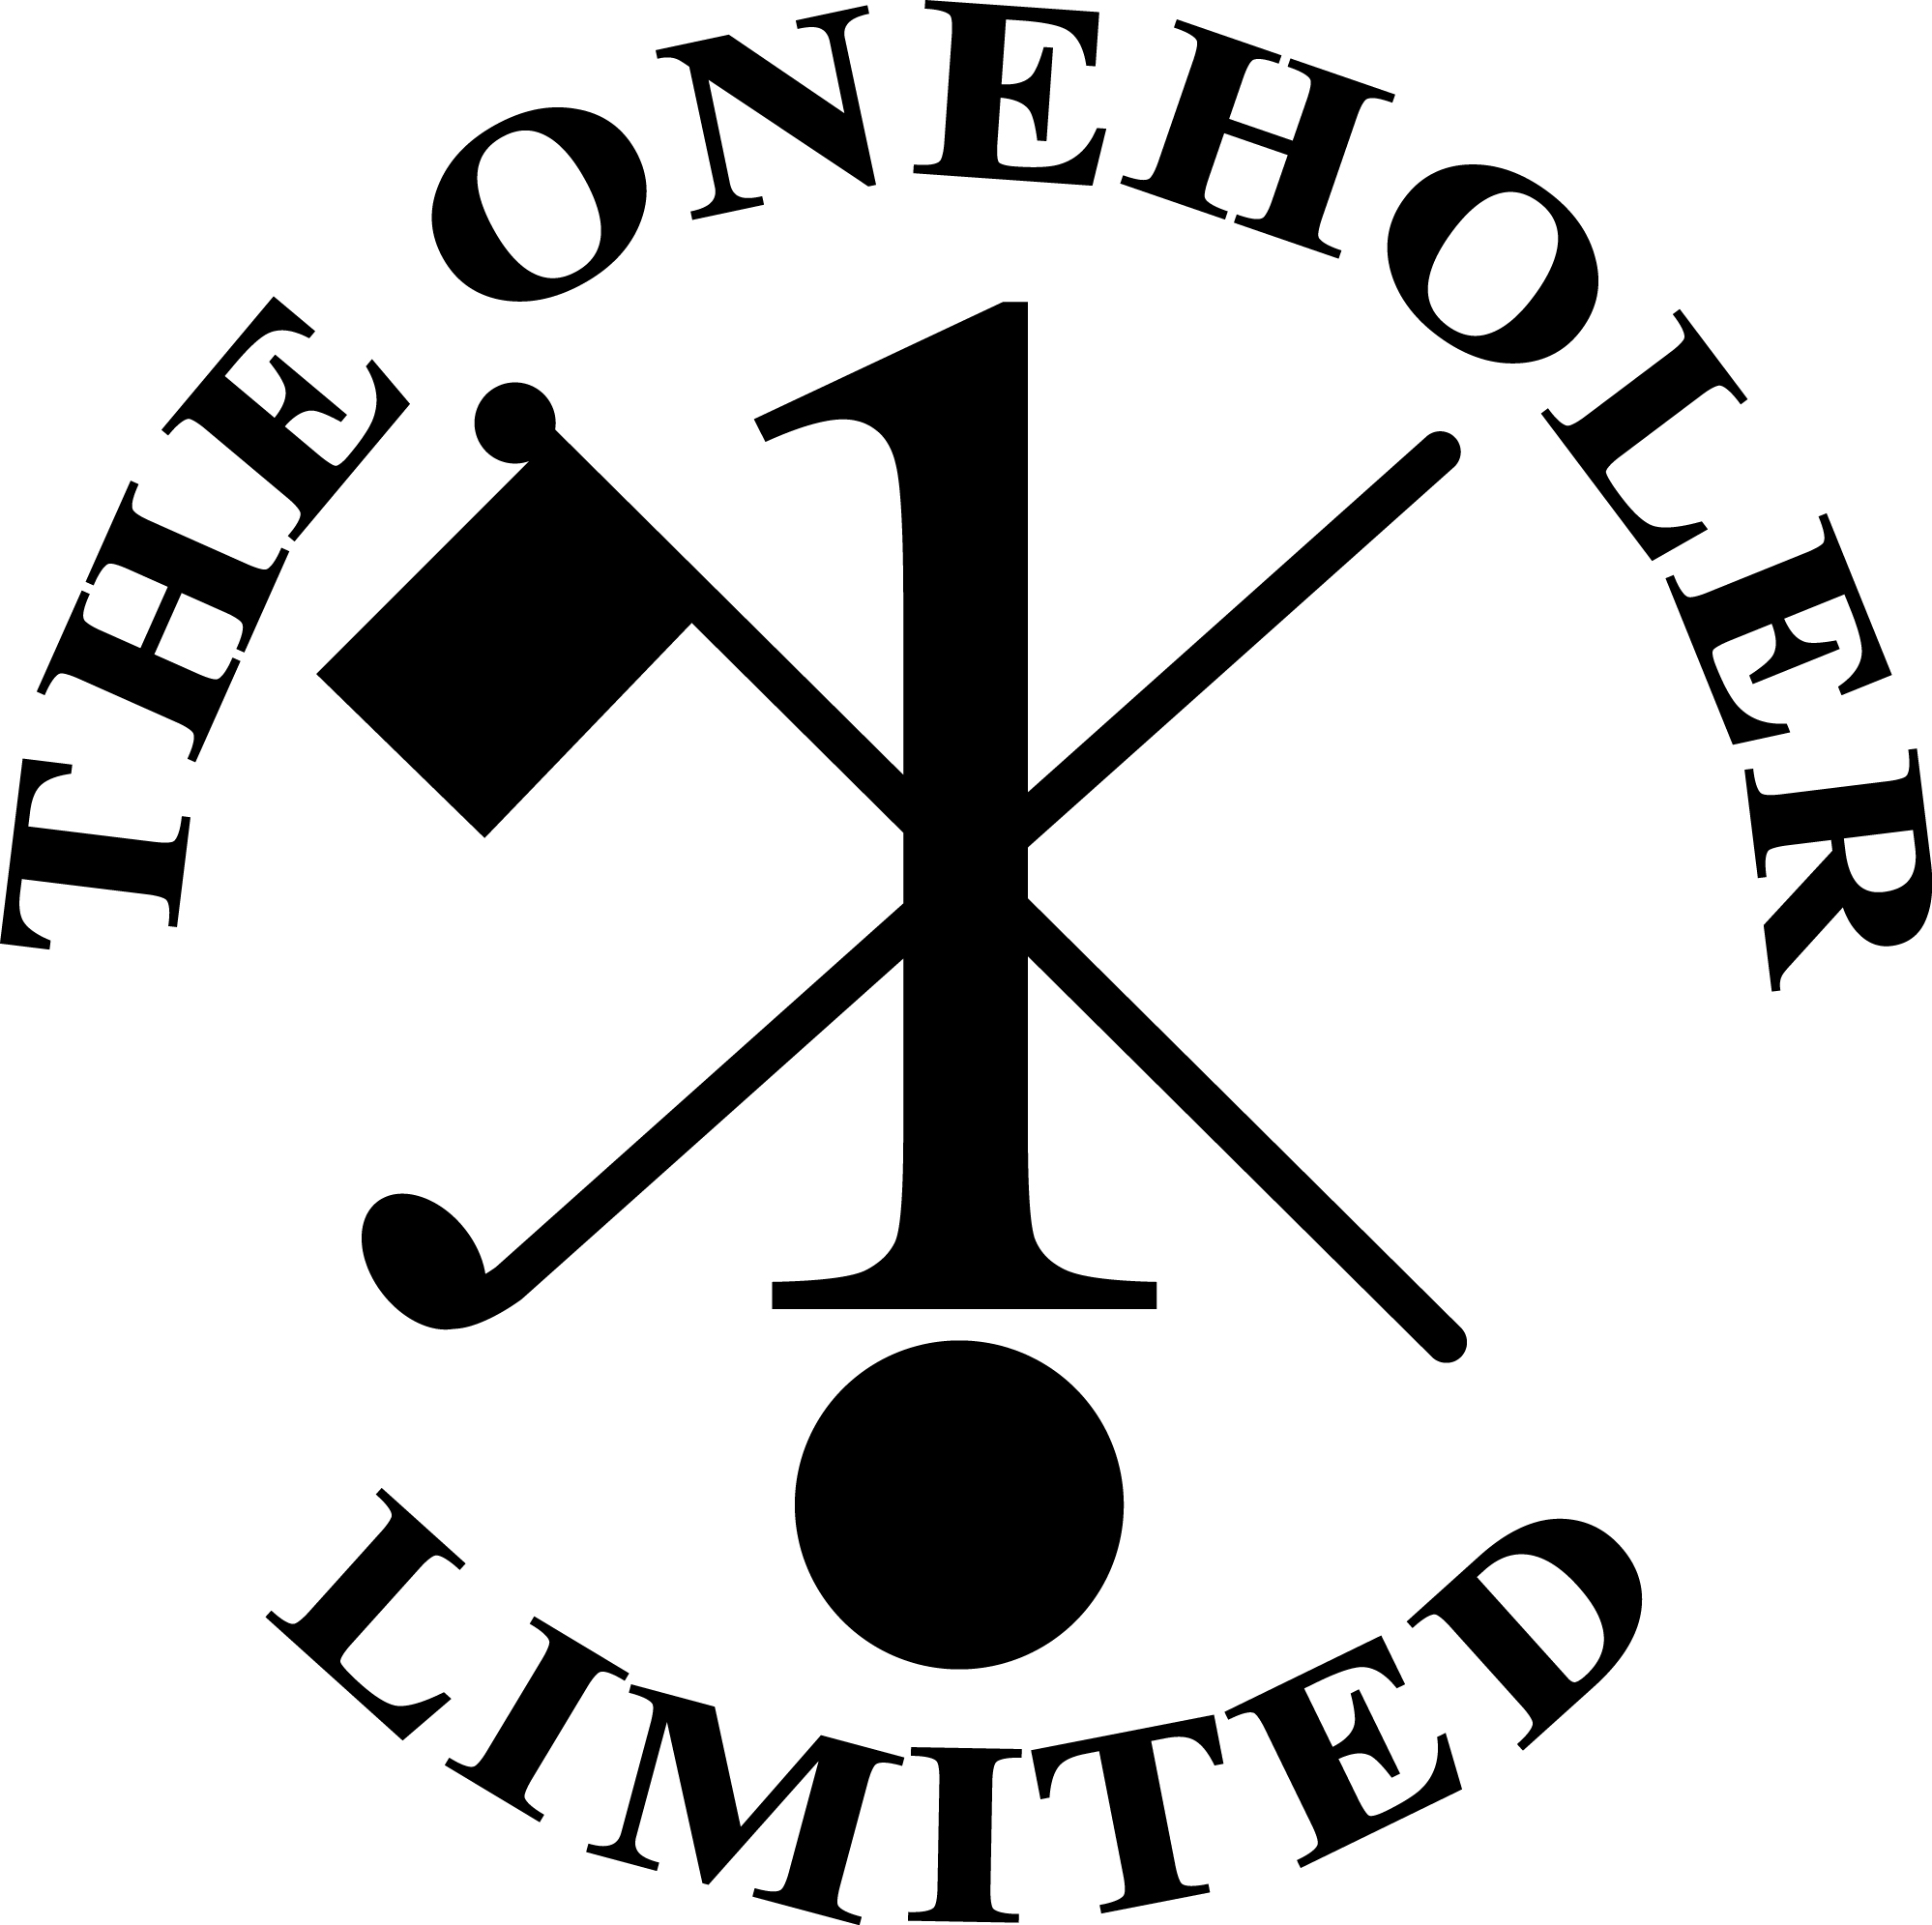 The Oneholer Limited